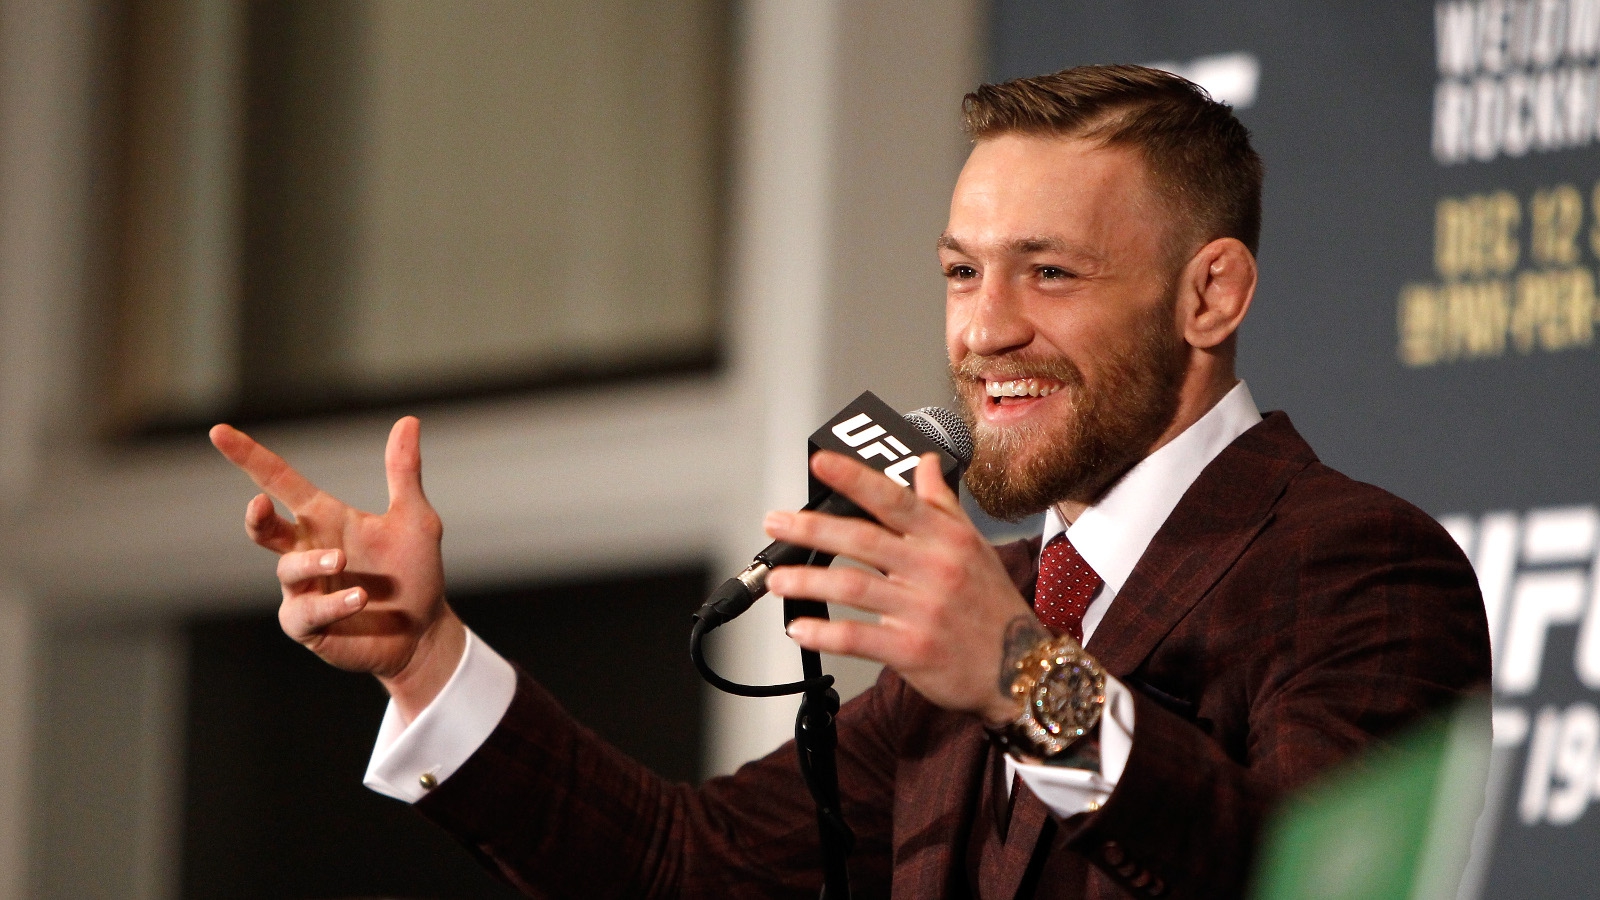 Stylish moments of 'The Notorious' Conor McGregor